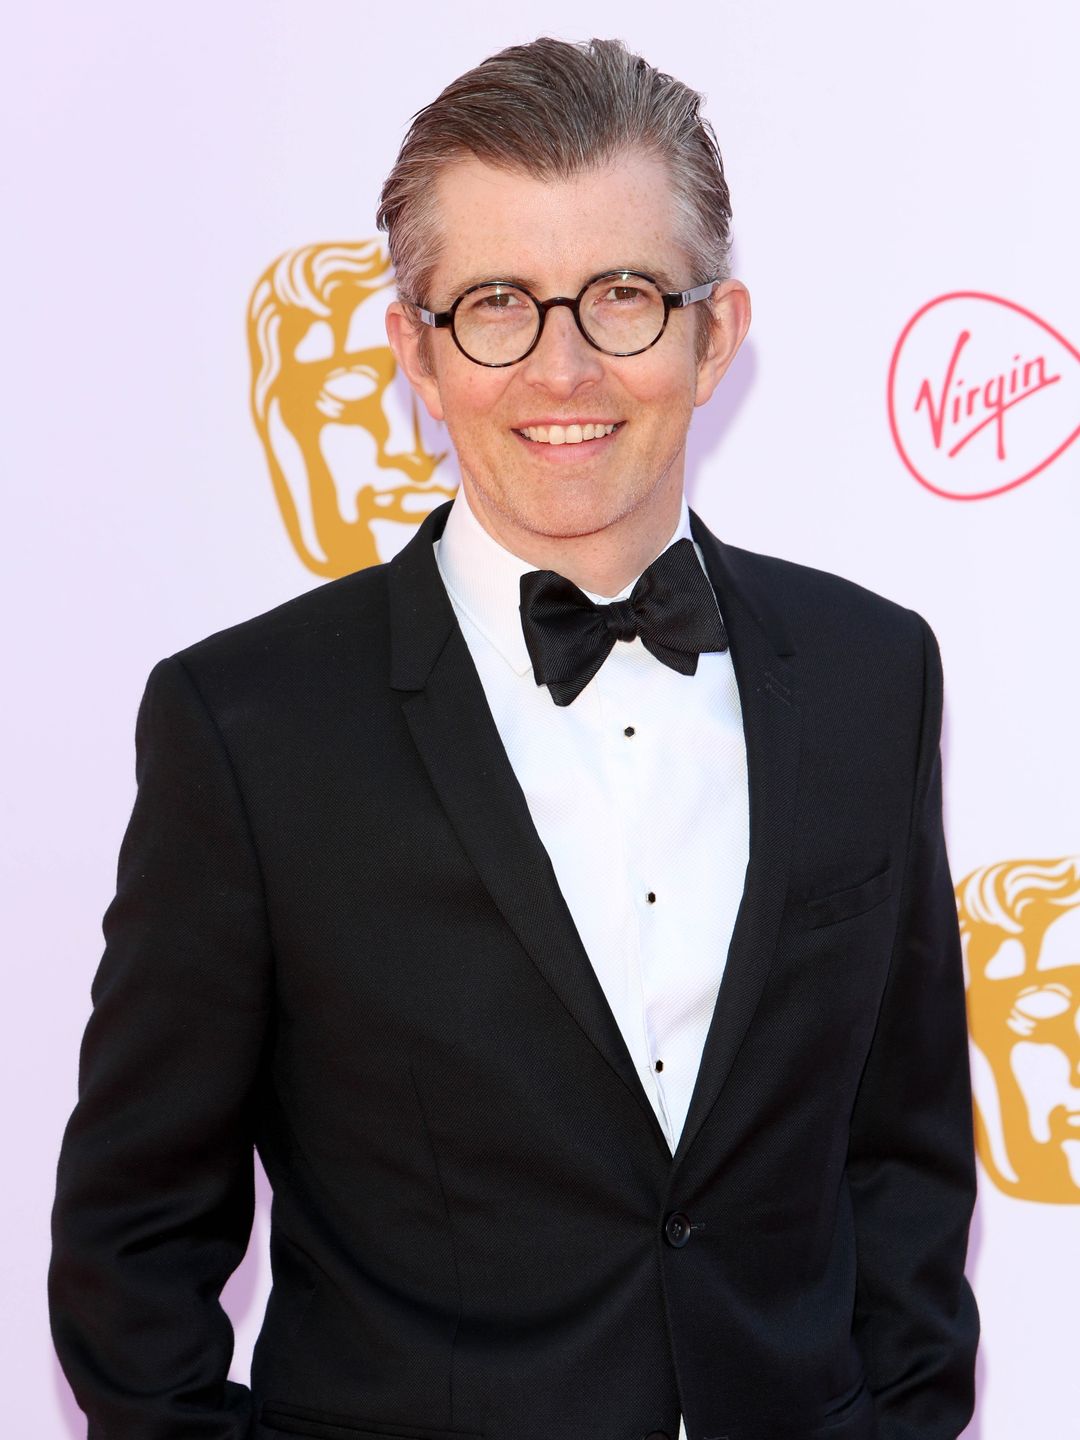 Gareth Malone stands in a suit on red carpet at the BAFTAs